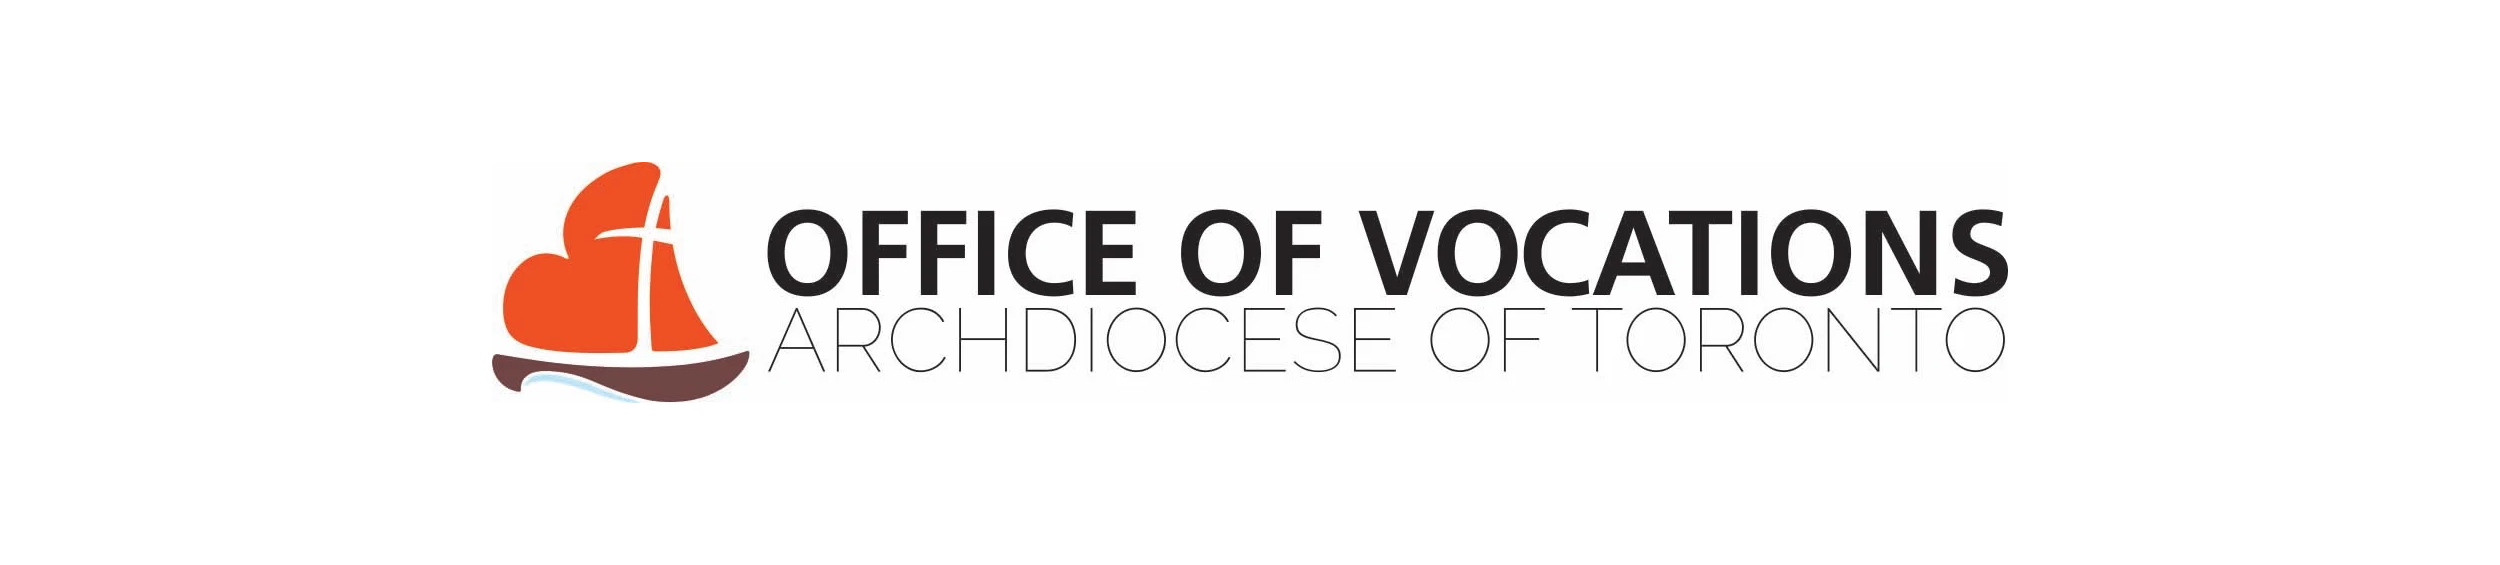 Logo of the Office of Vocations